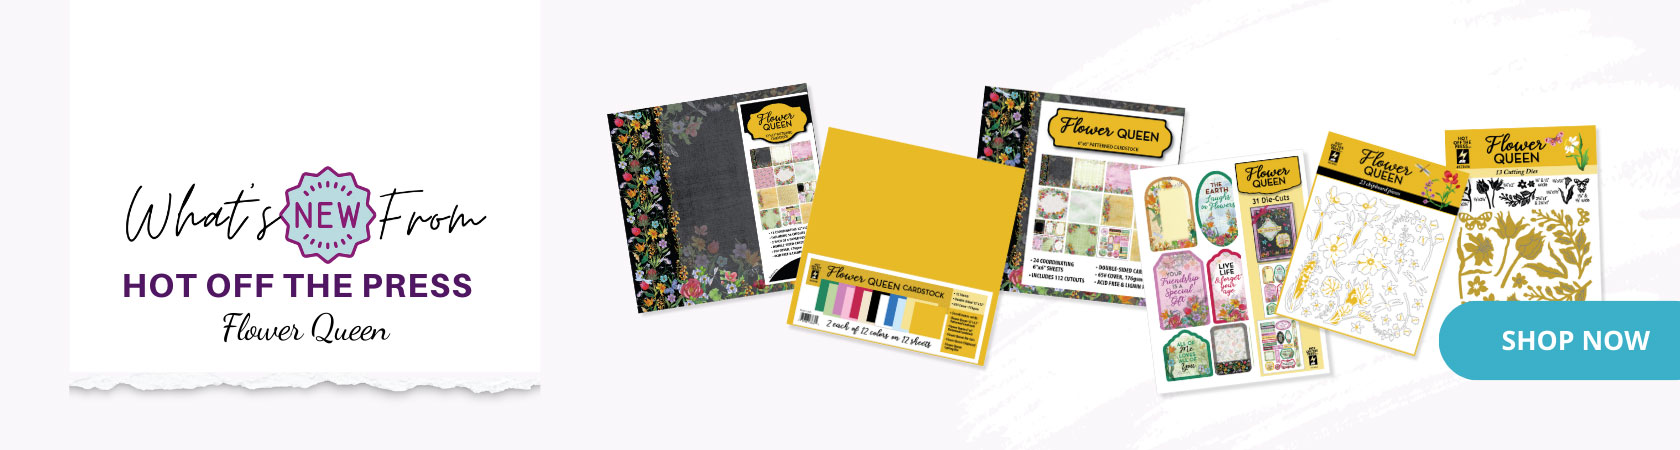 Catchy Crafts - Scrapbooking, Stamping and Card Making Supplies - Clearance